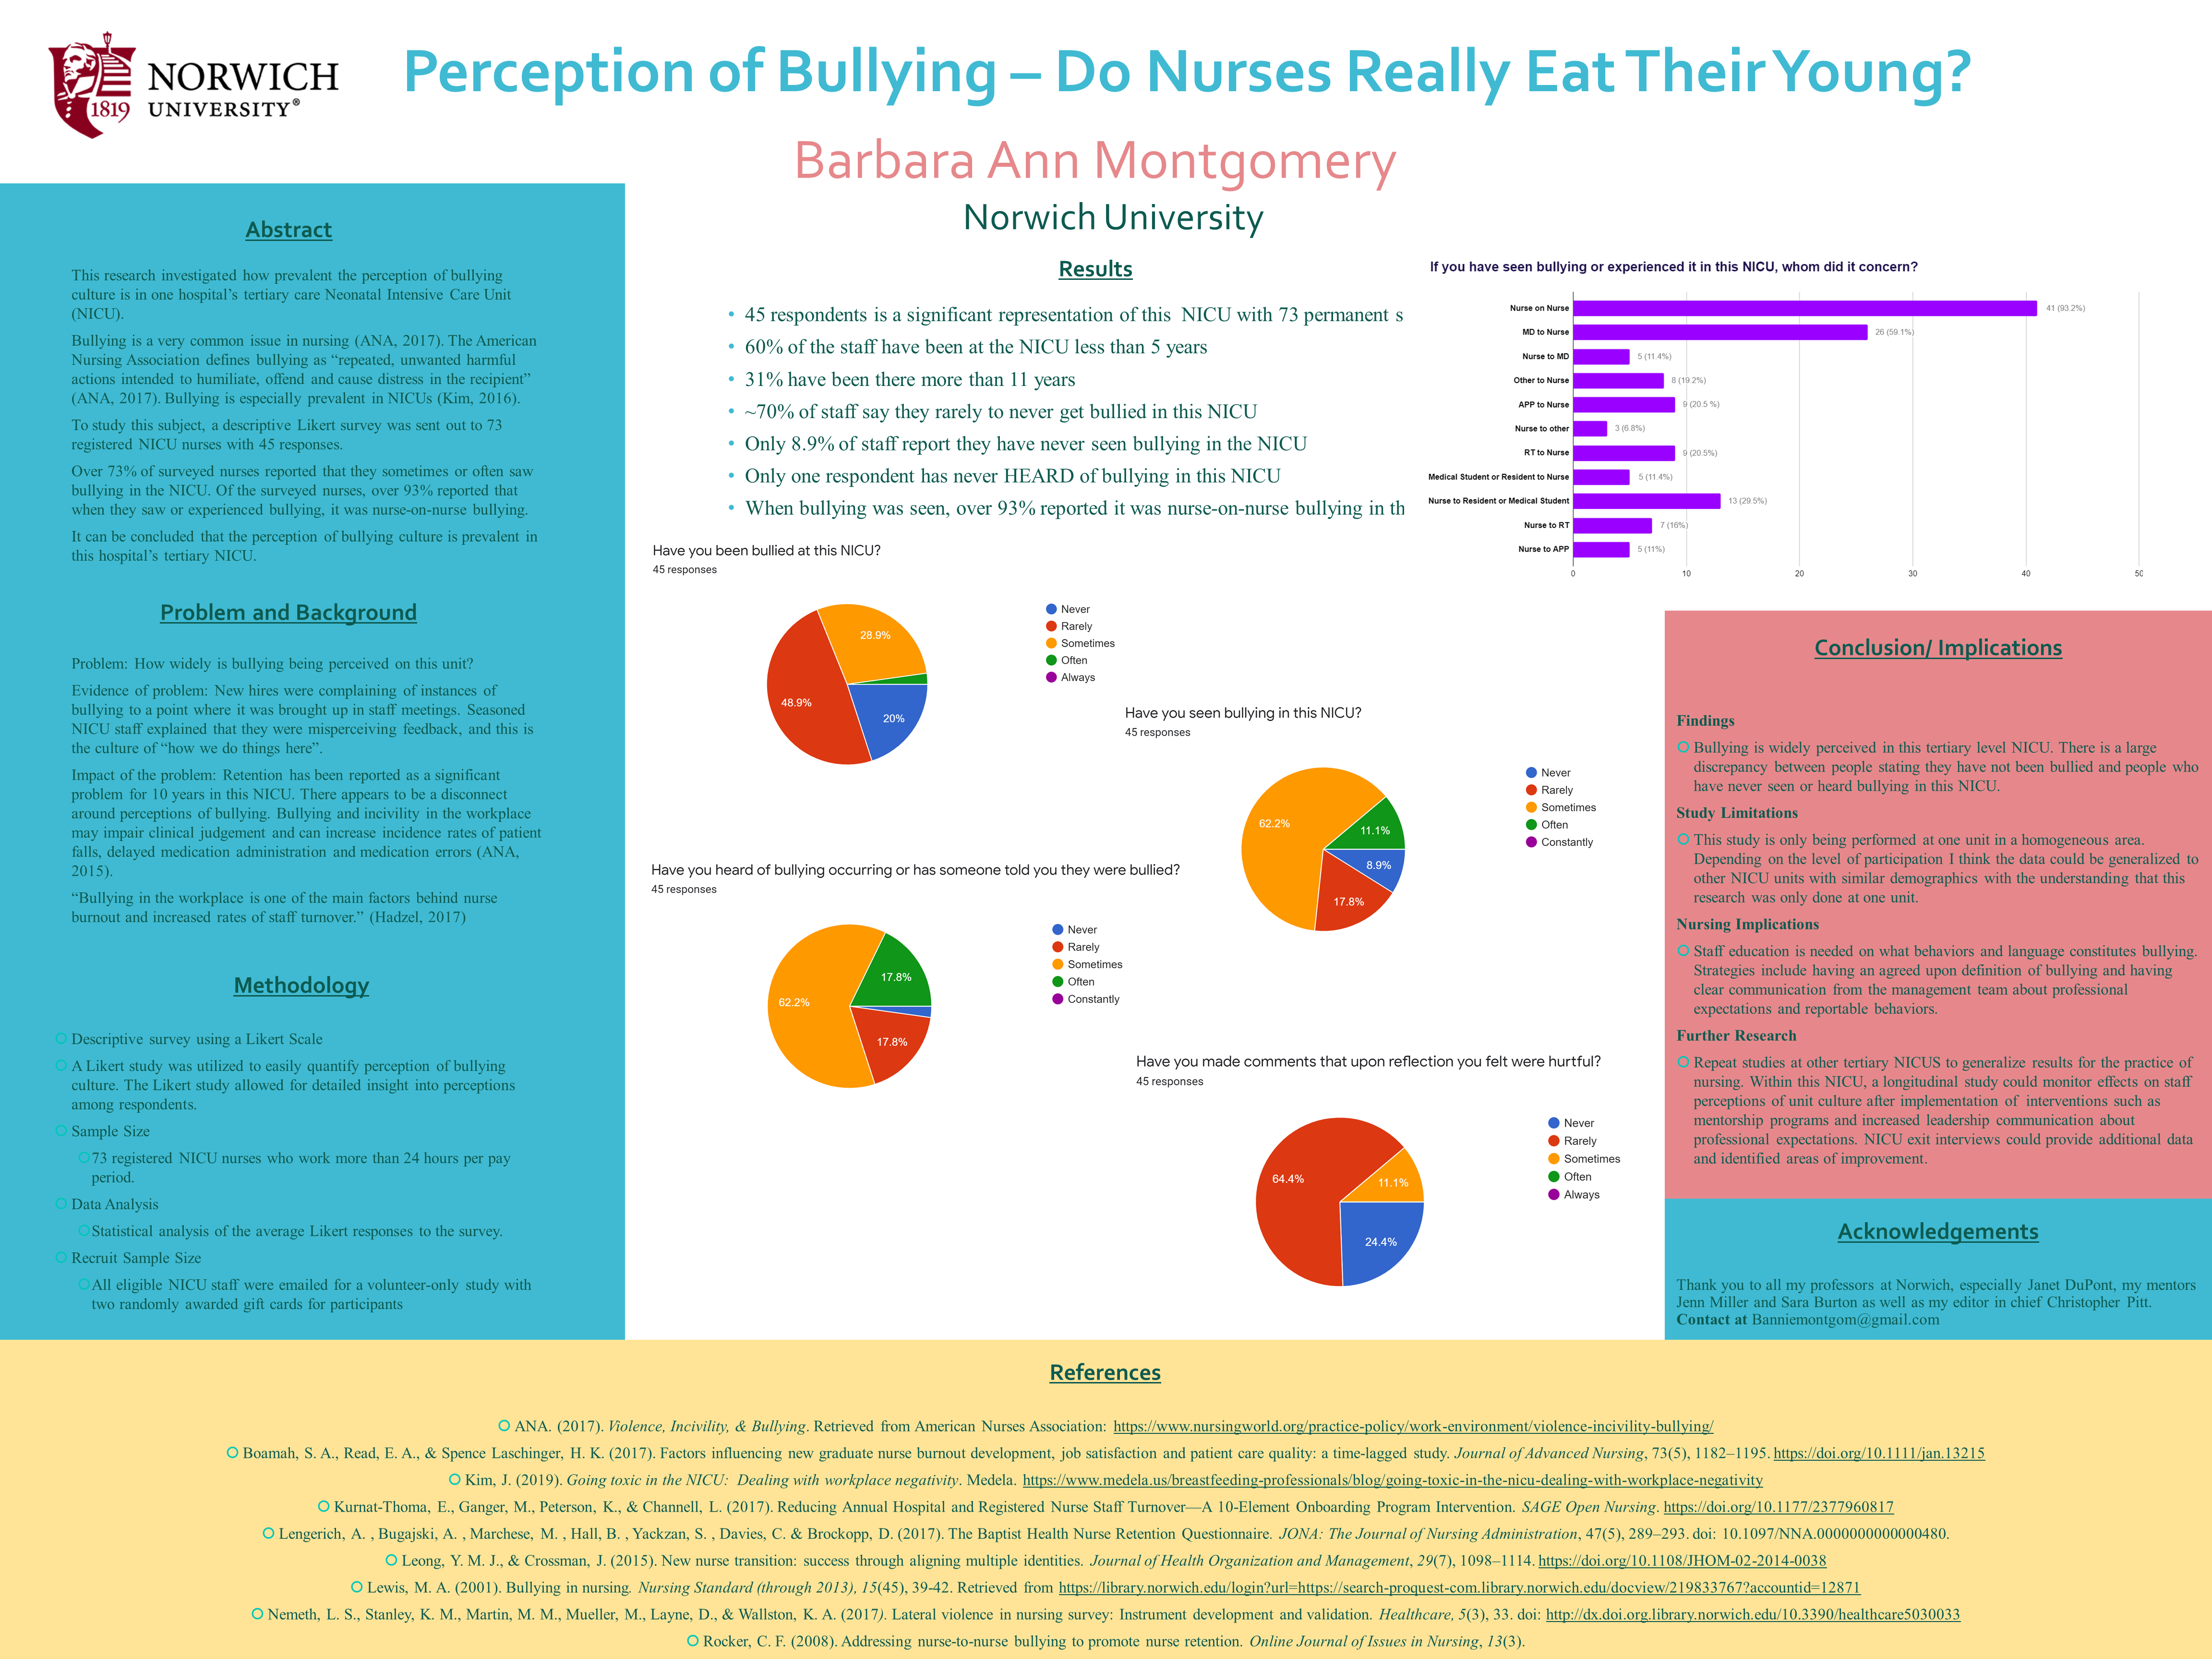 Showcase Image for Bullying in Nursing - Do Nurses Really Eat Their Young